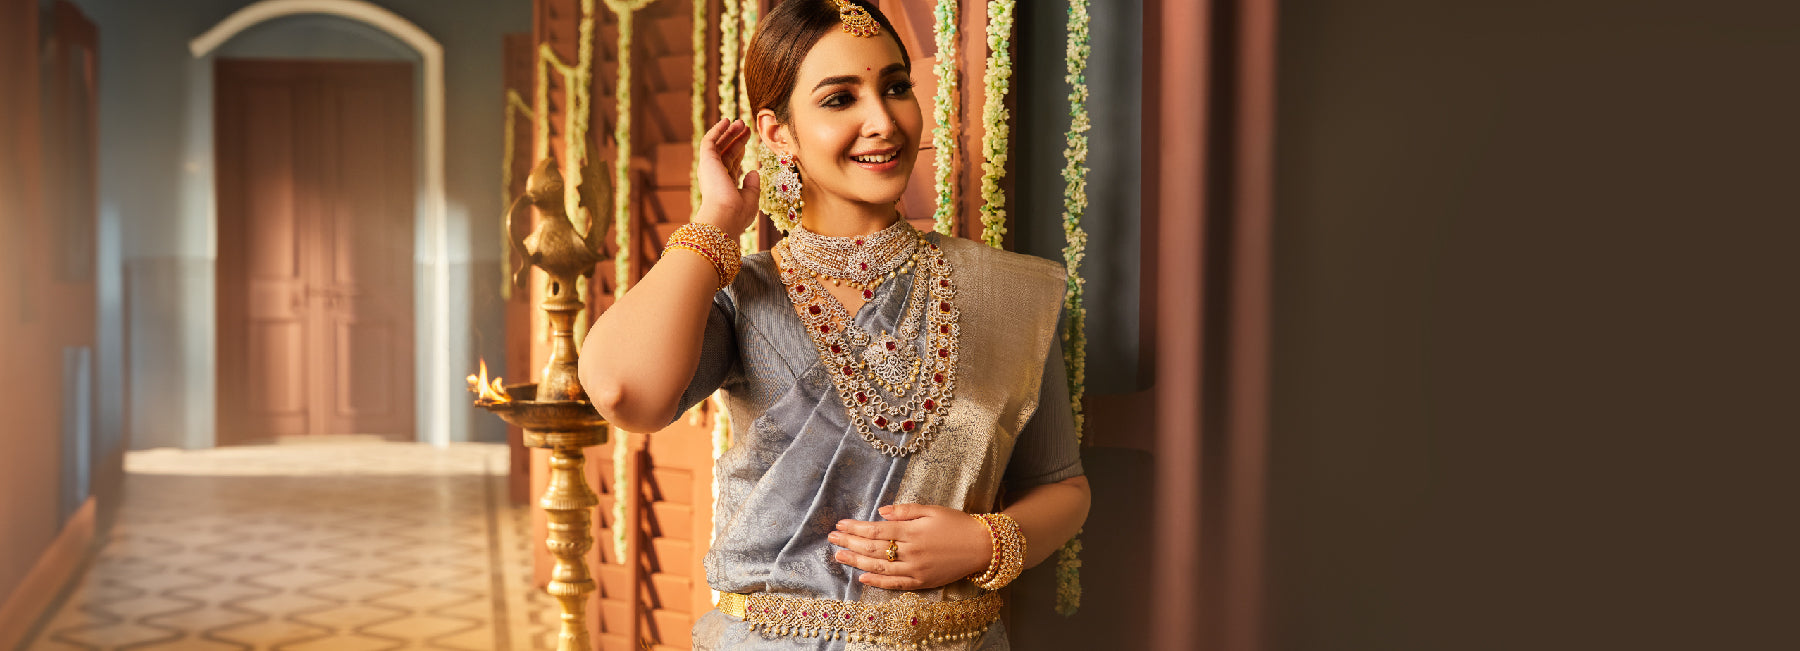 Must-Have Wedding Jewelry Styles for the Indian Bride